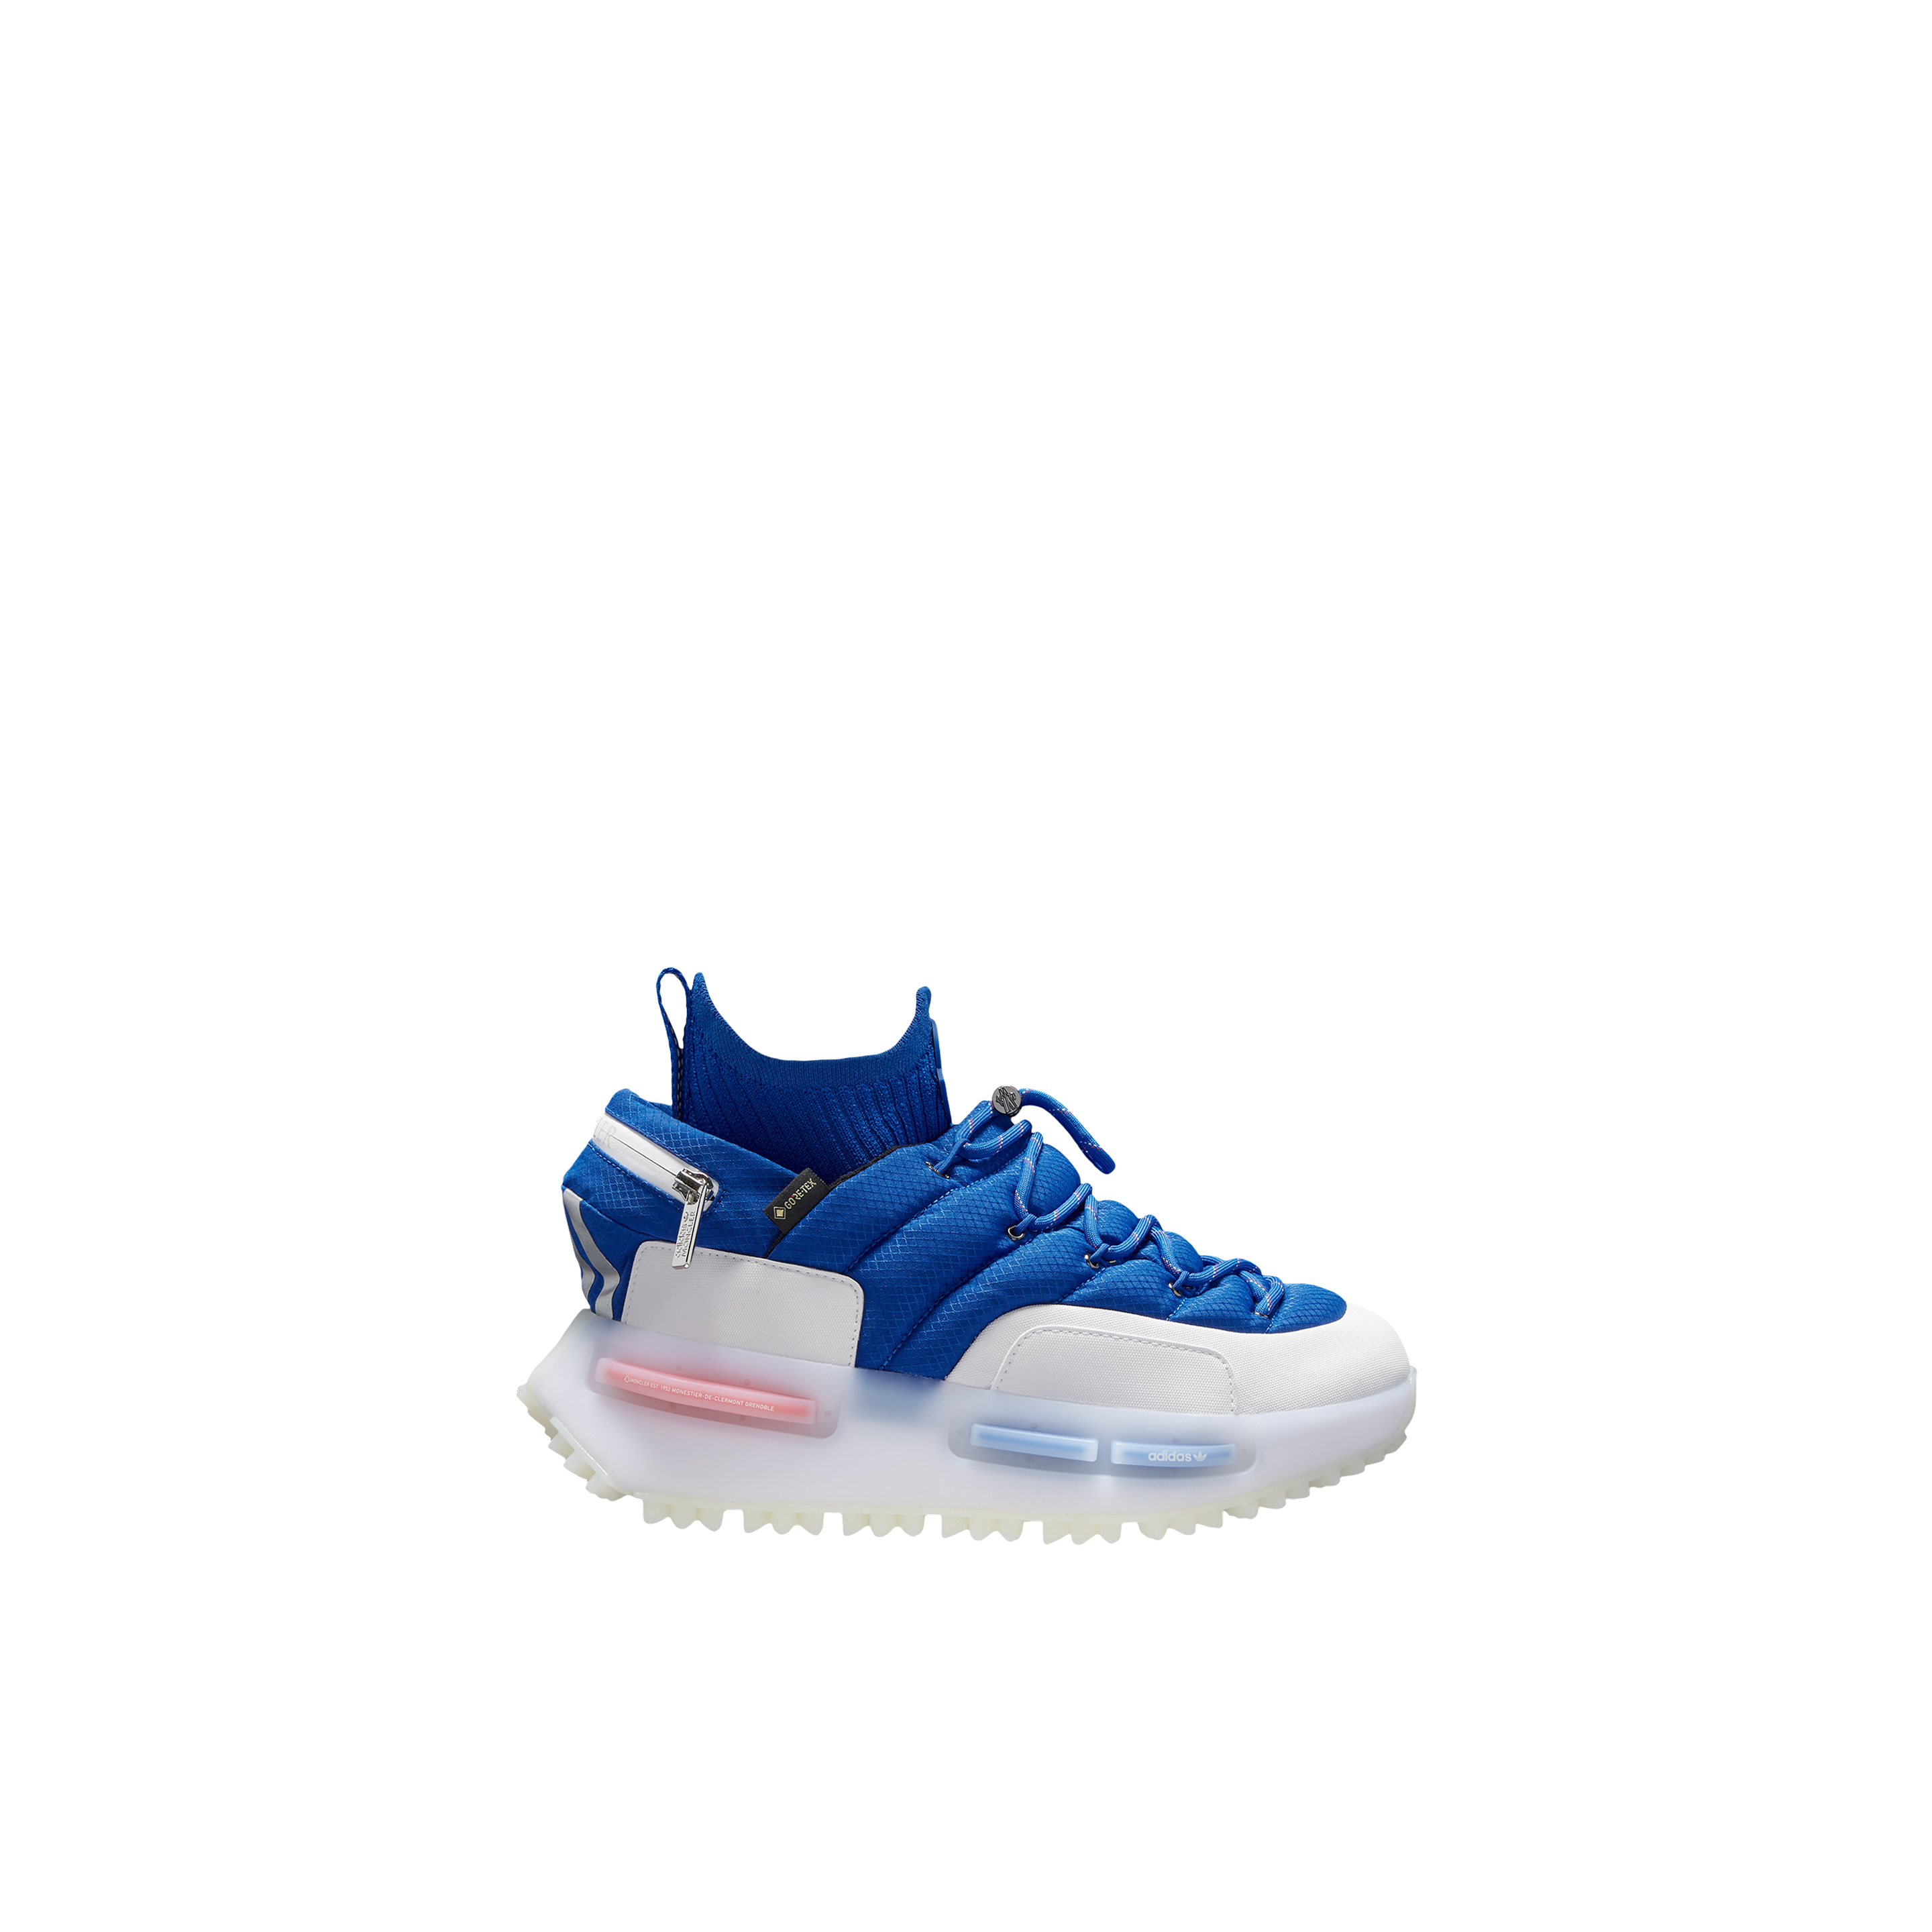 Moncler X Adidas Nmd S1 Trainers In Blue